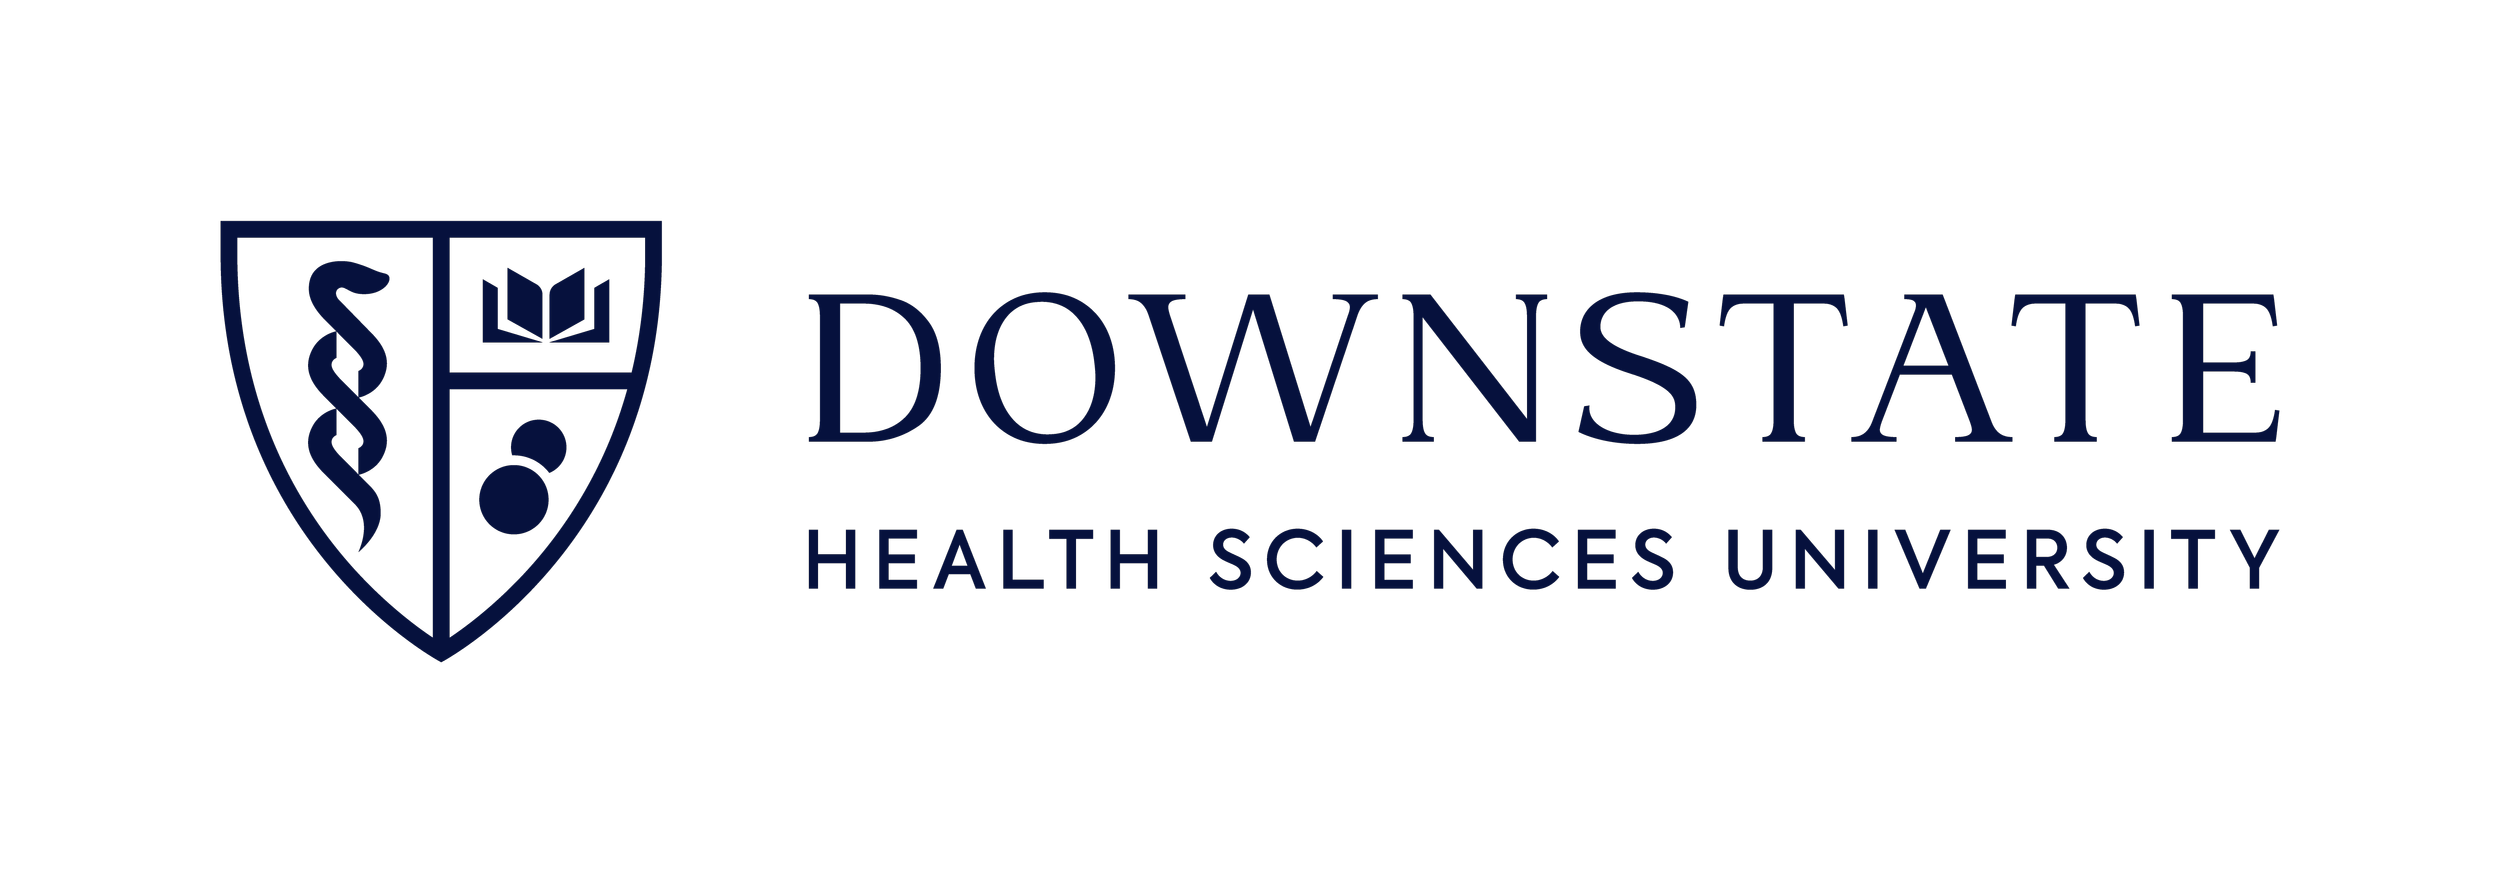 Downstate Leaht sciences logoprimary_logo - horizontal.png